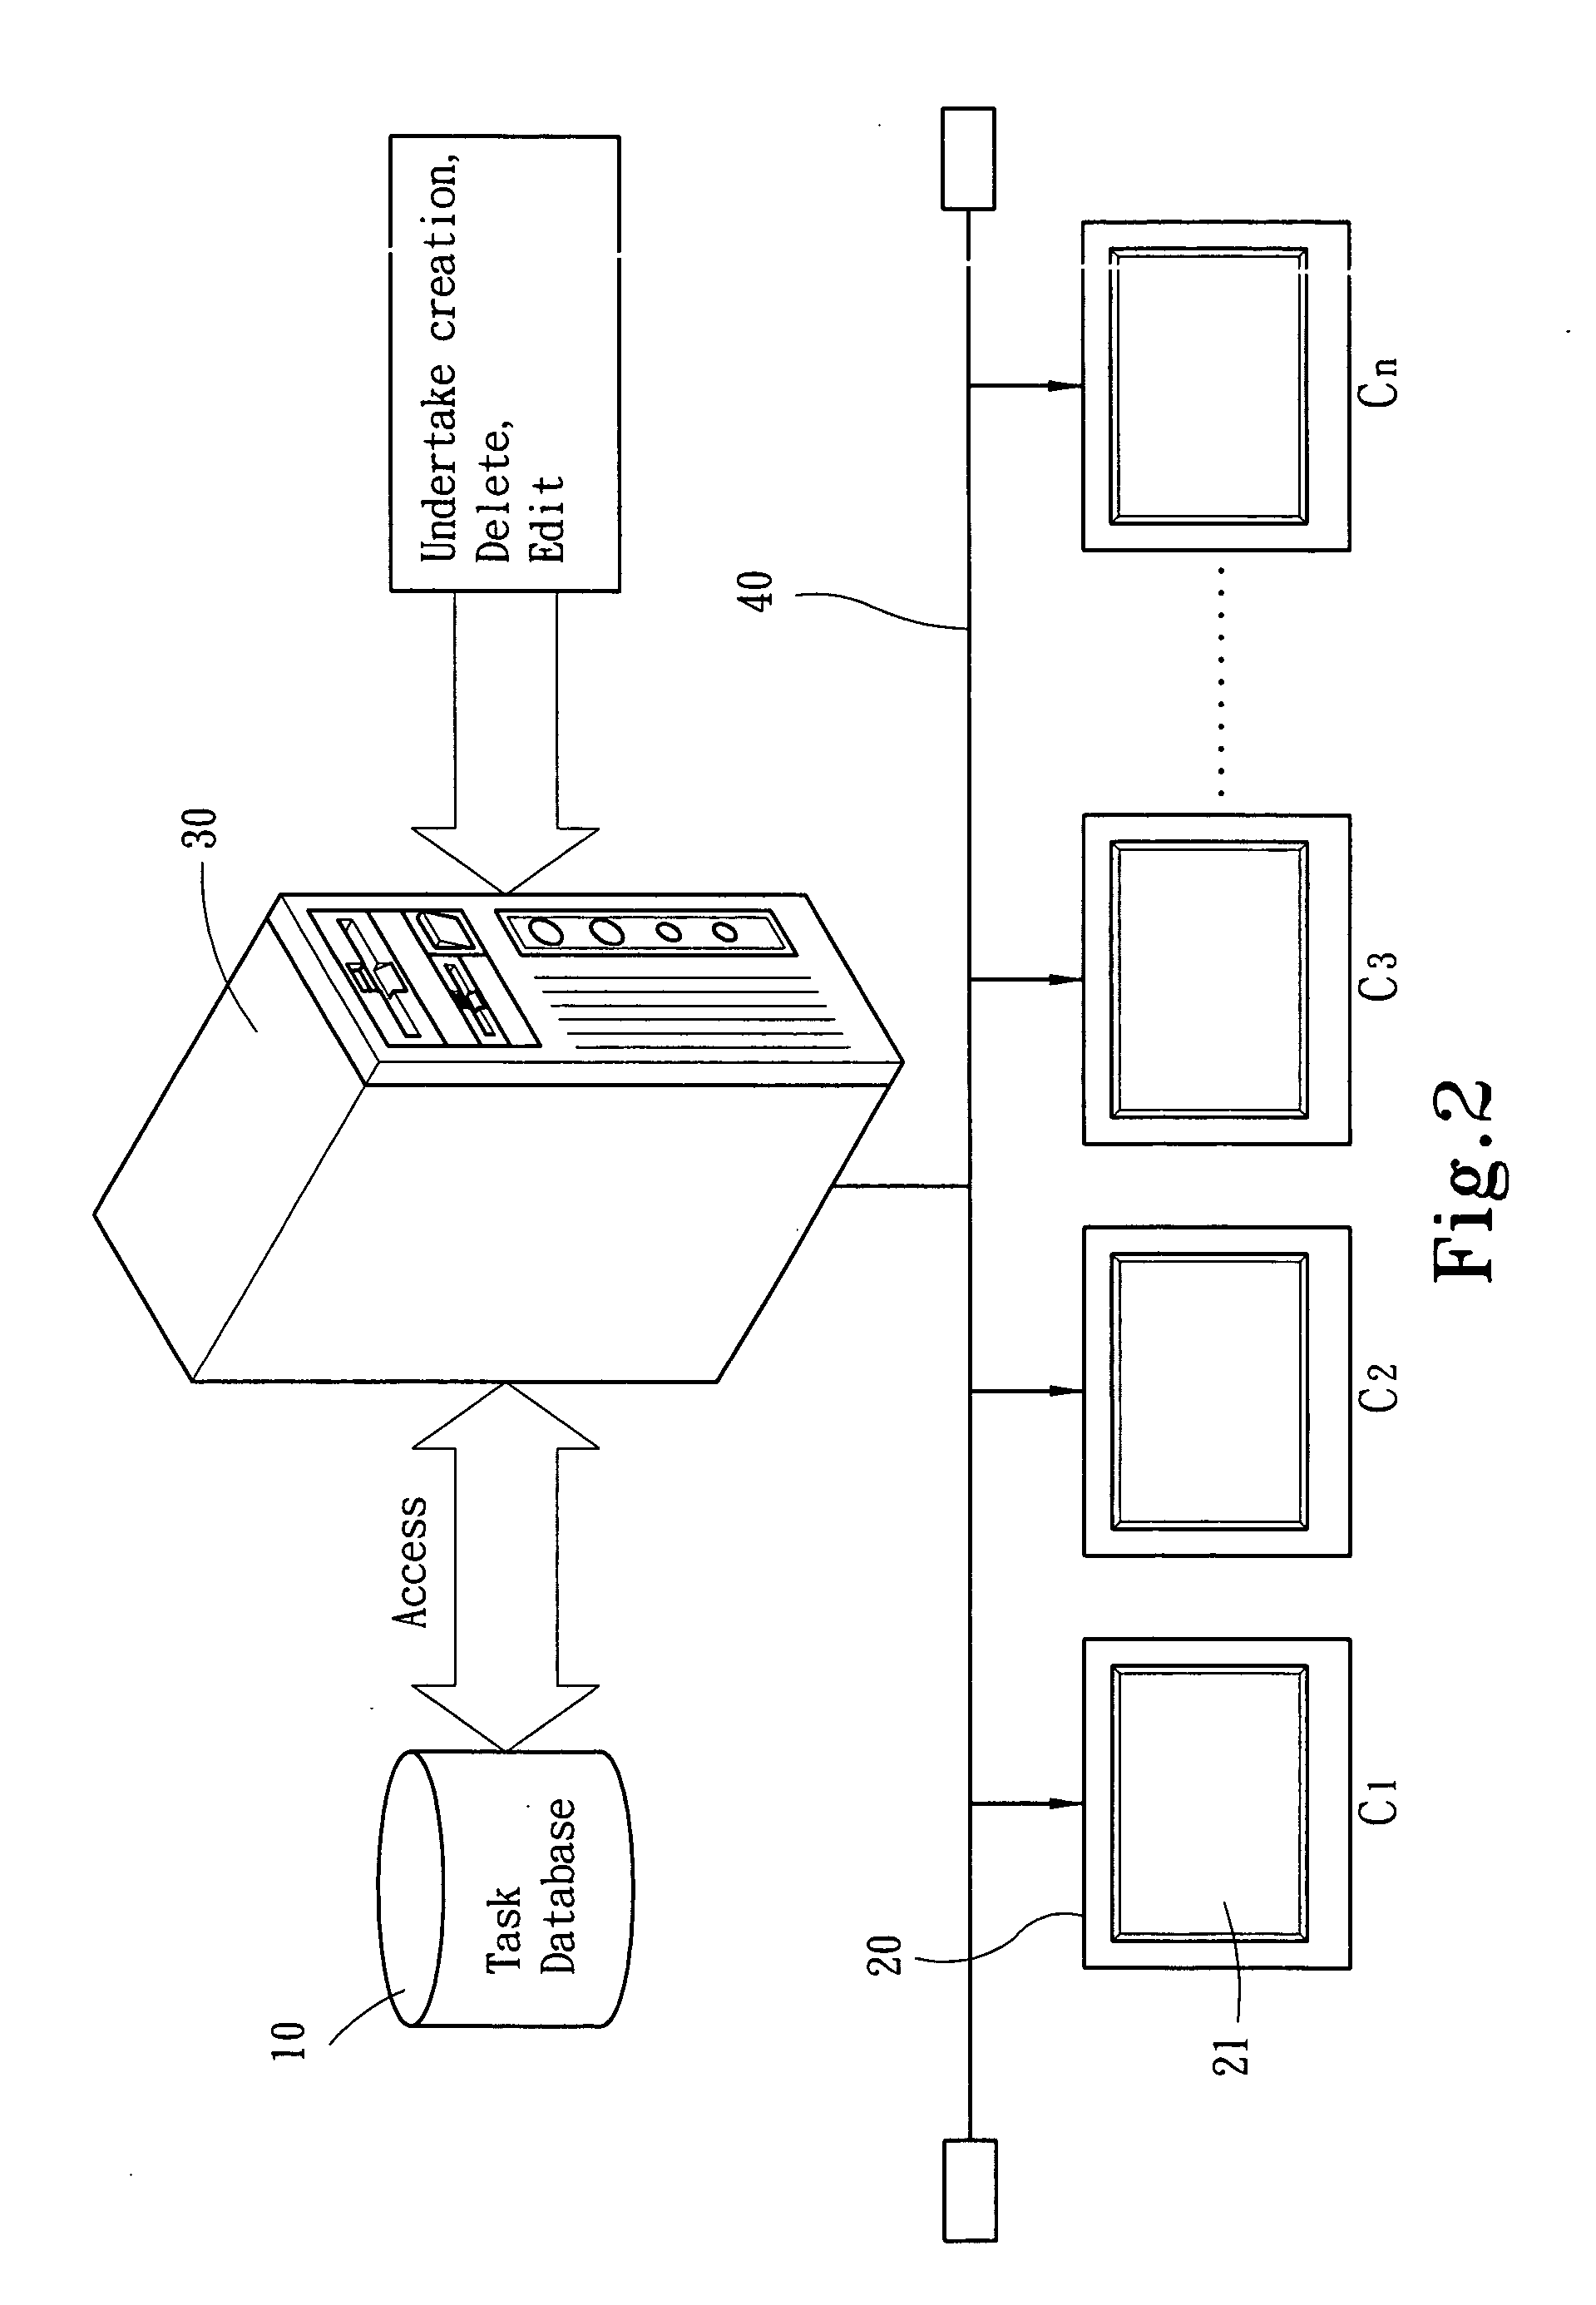 Support system for standard operation procedure